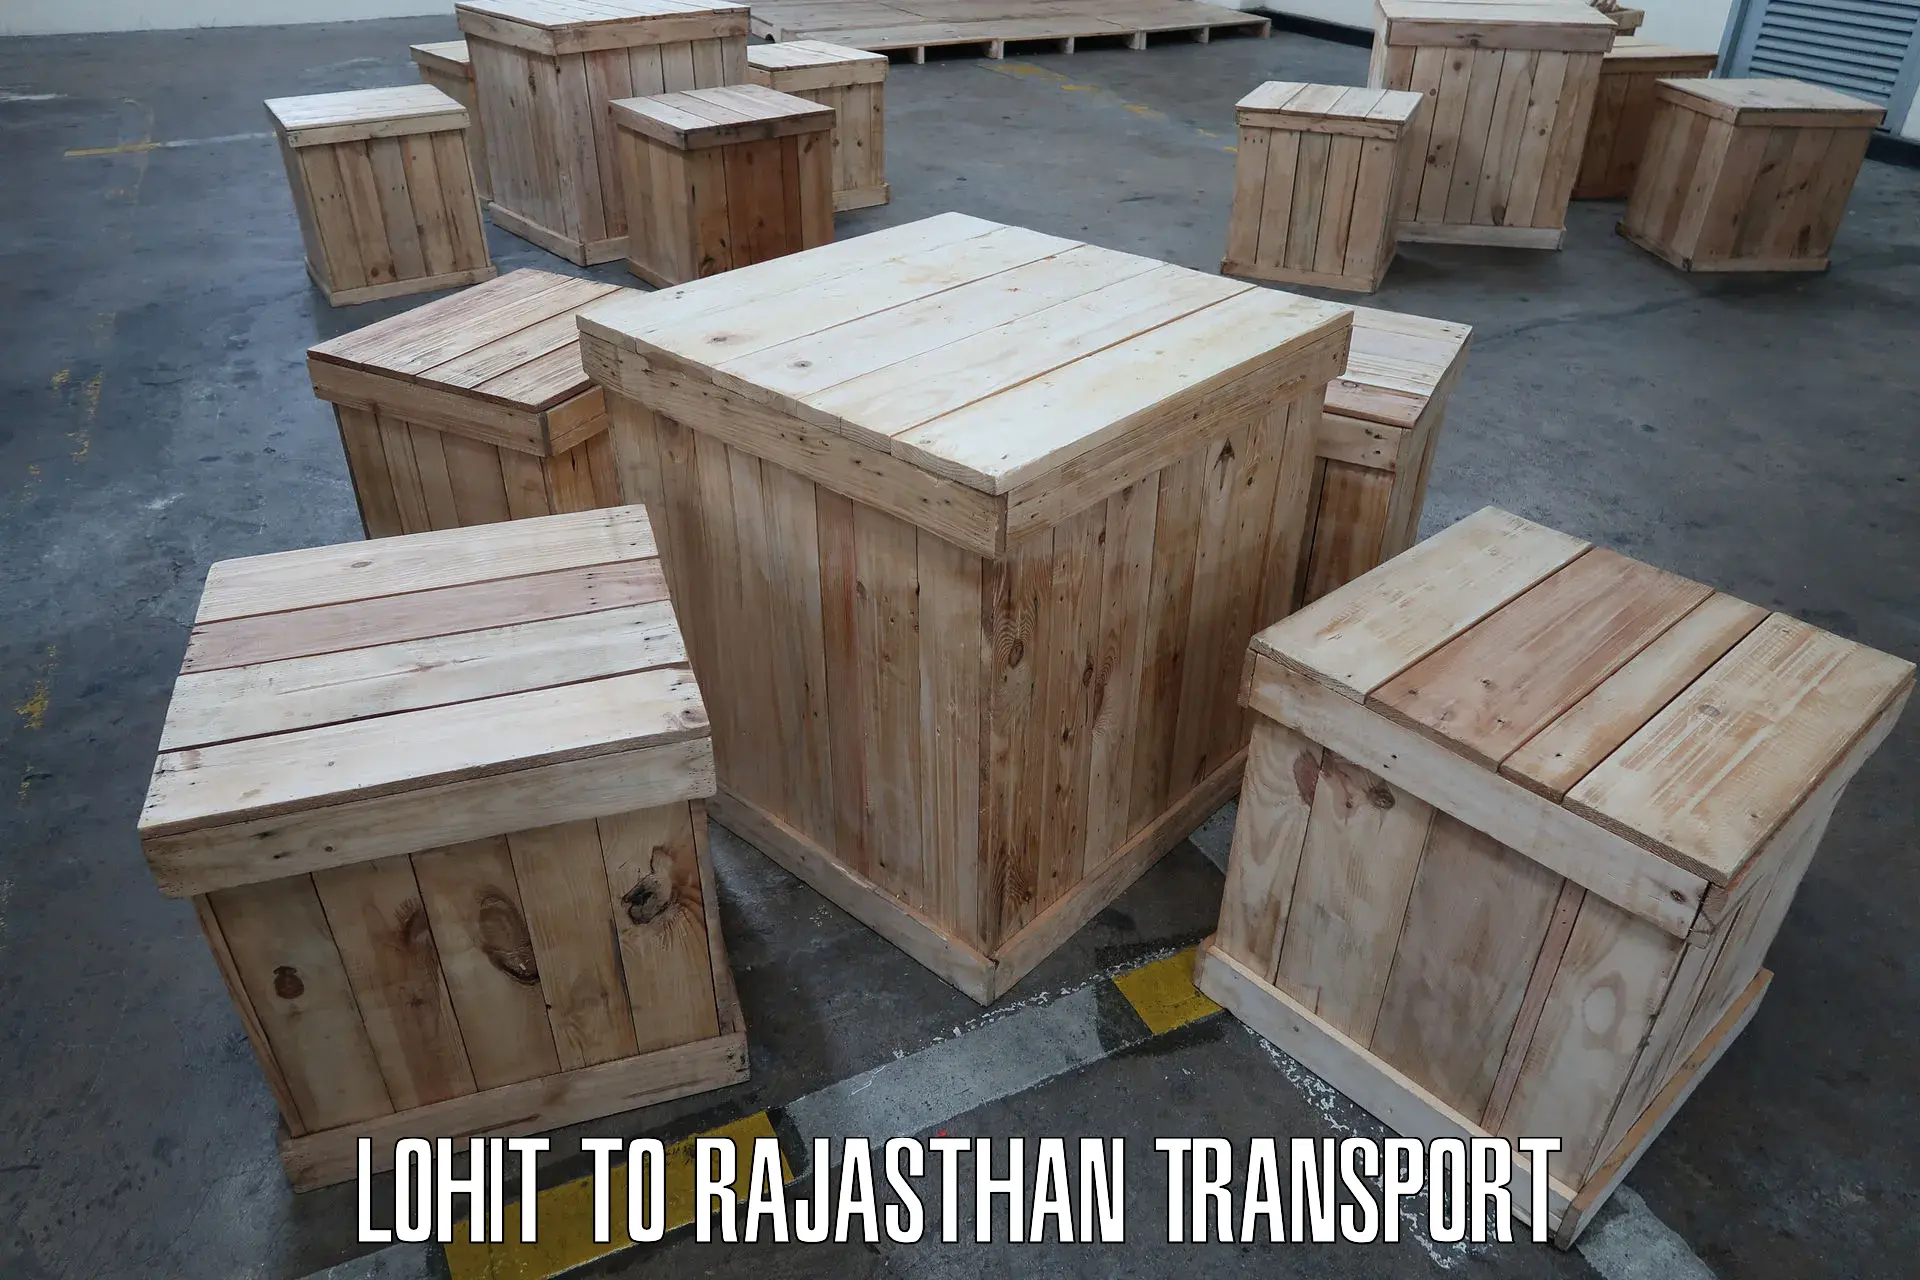 Container transport service Lohit to Alwar